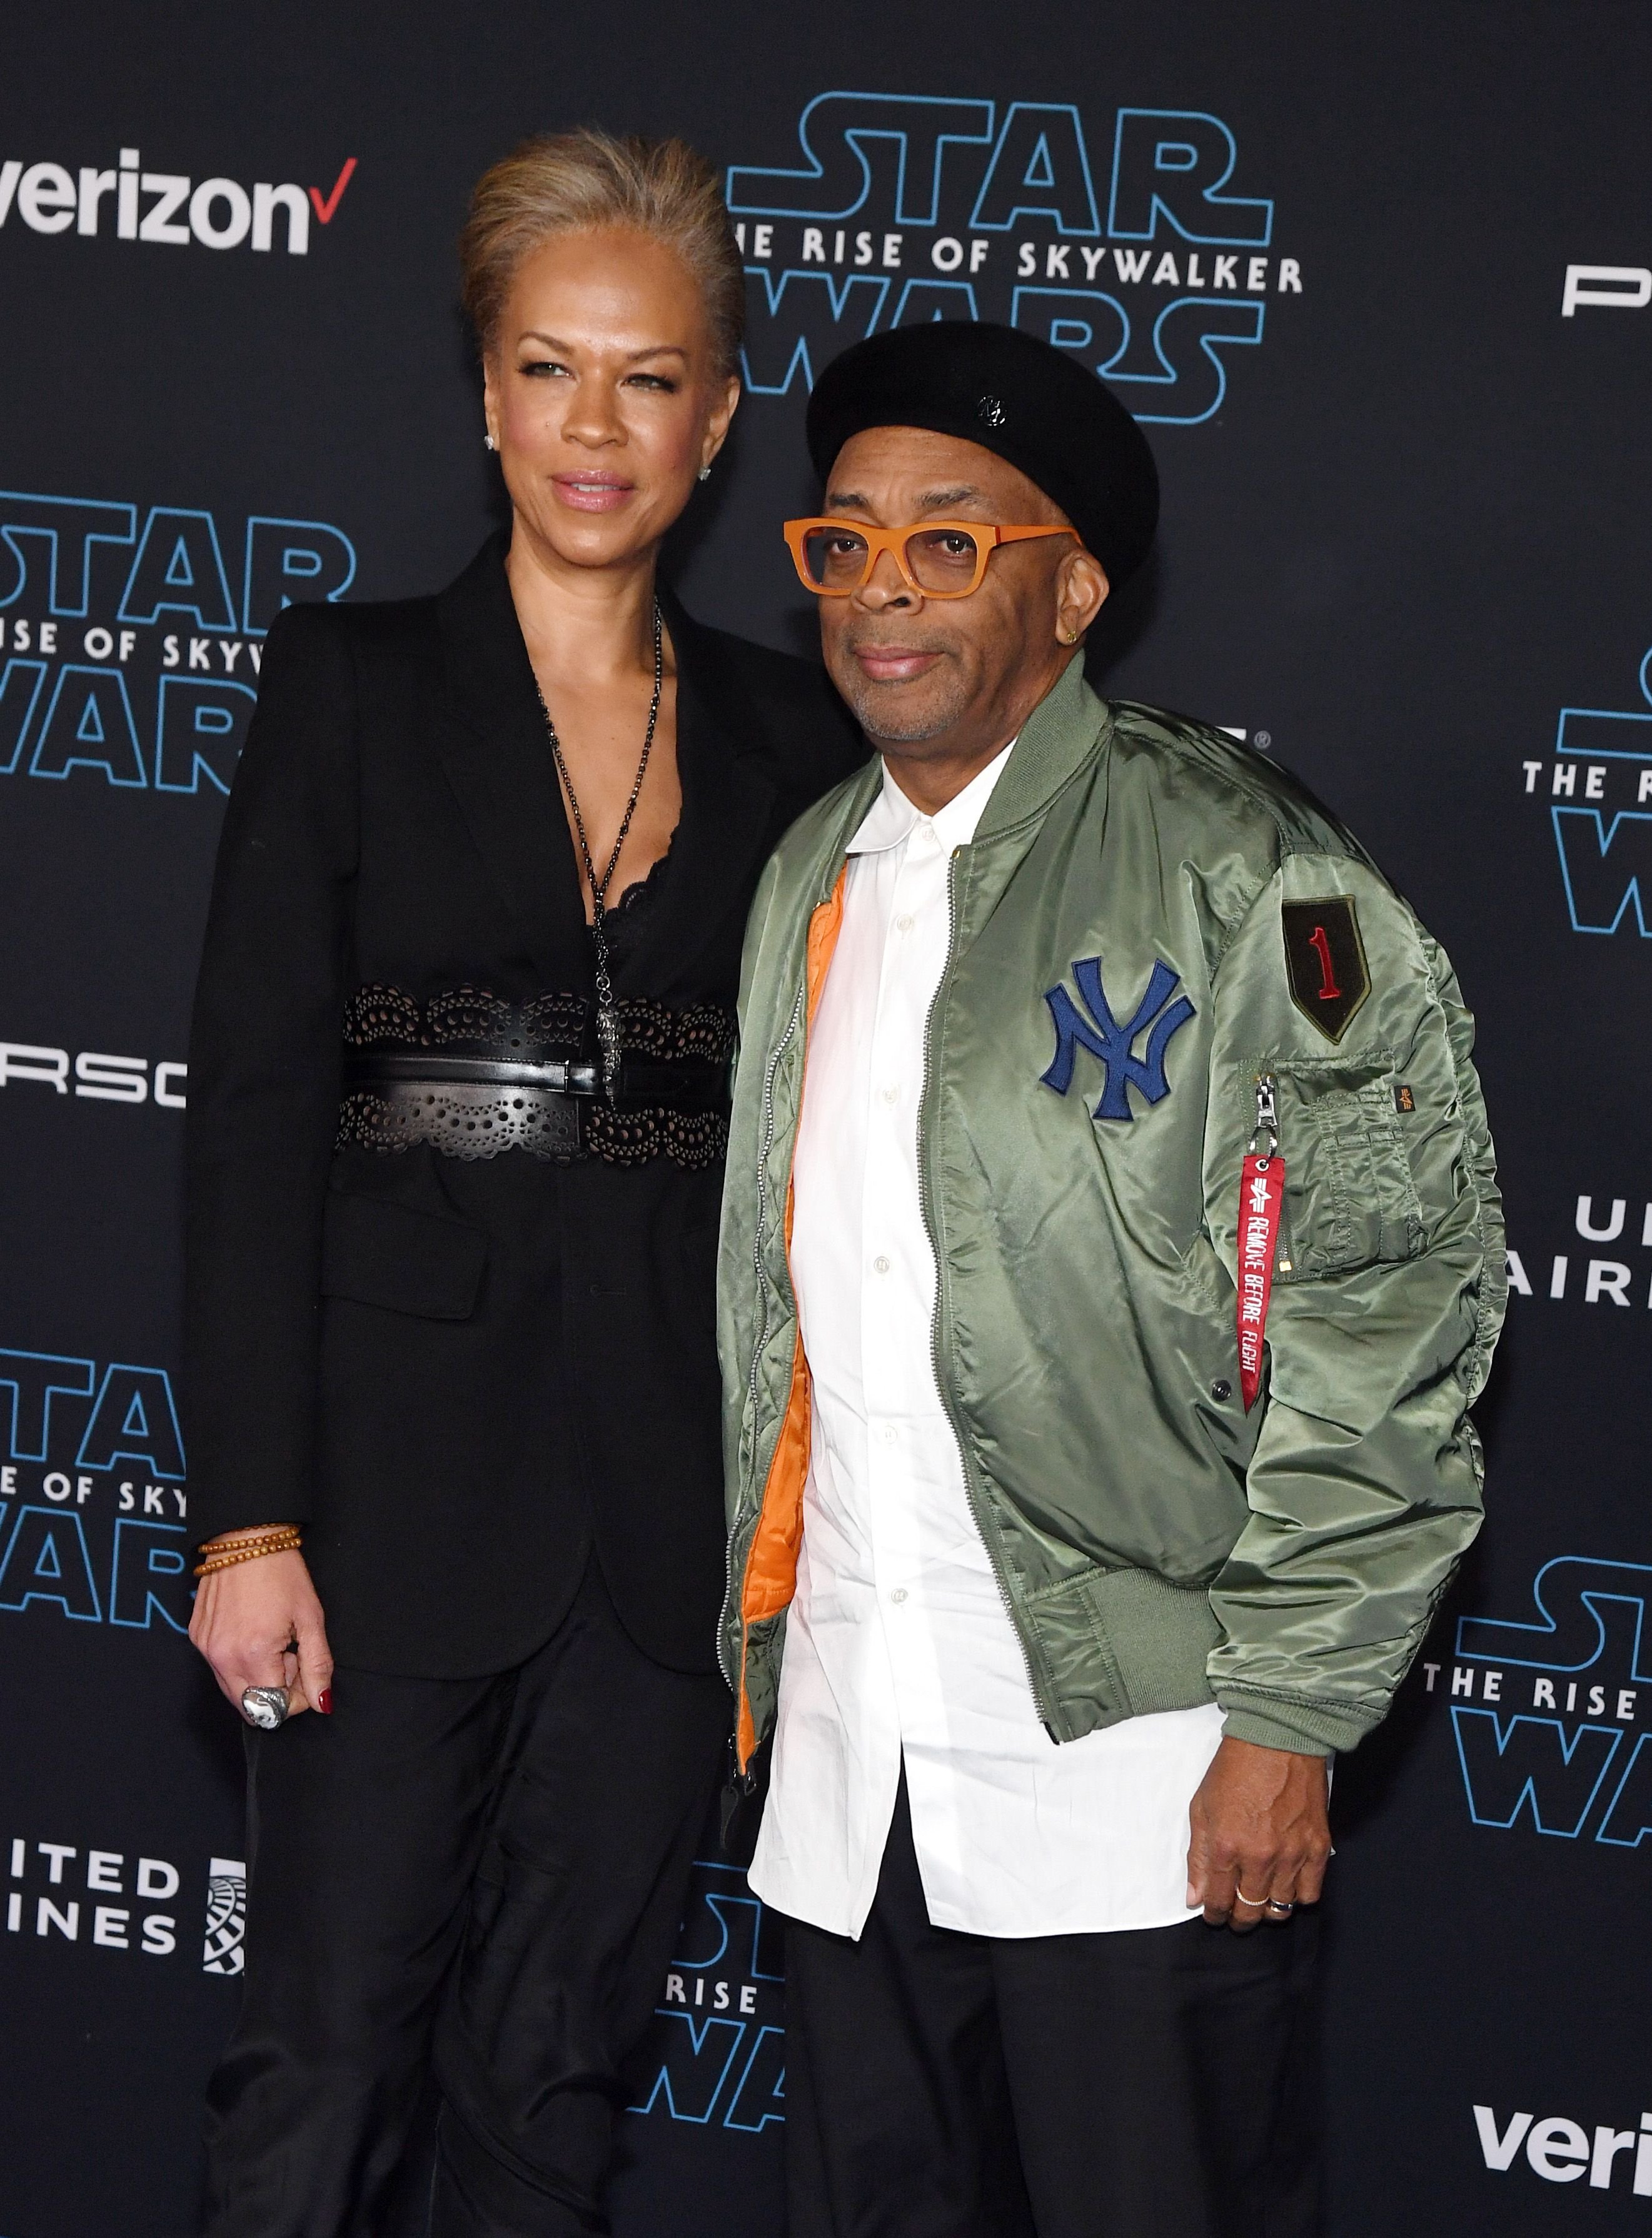 Tonya Lewis Lee and Spike Lee,at the premiere of "Star Wars: The Rise of Skywalker" in December 2019 in Hollywood | Source: Getty Images